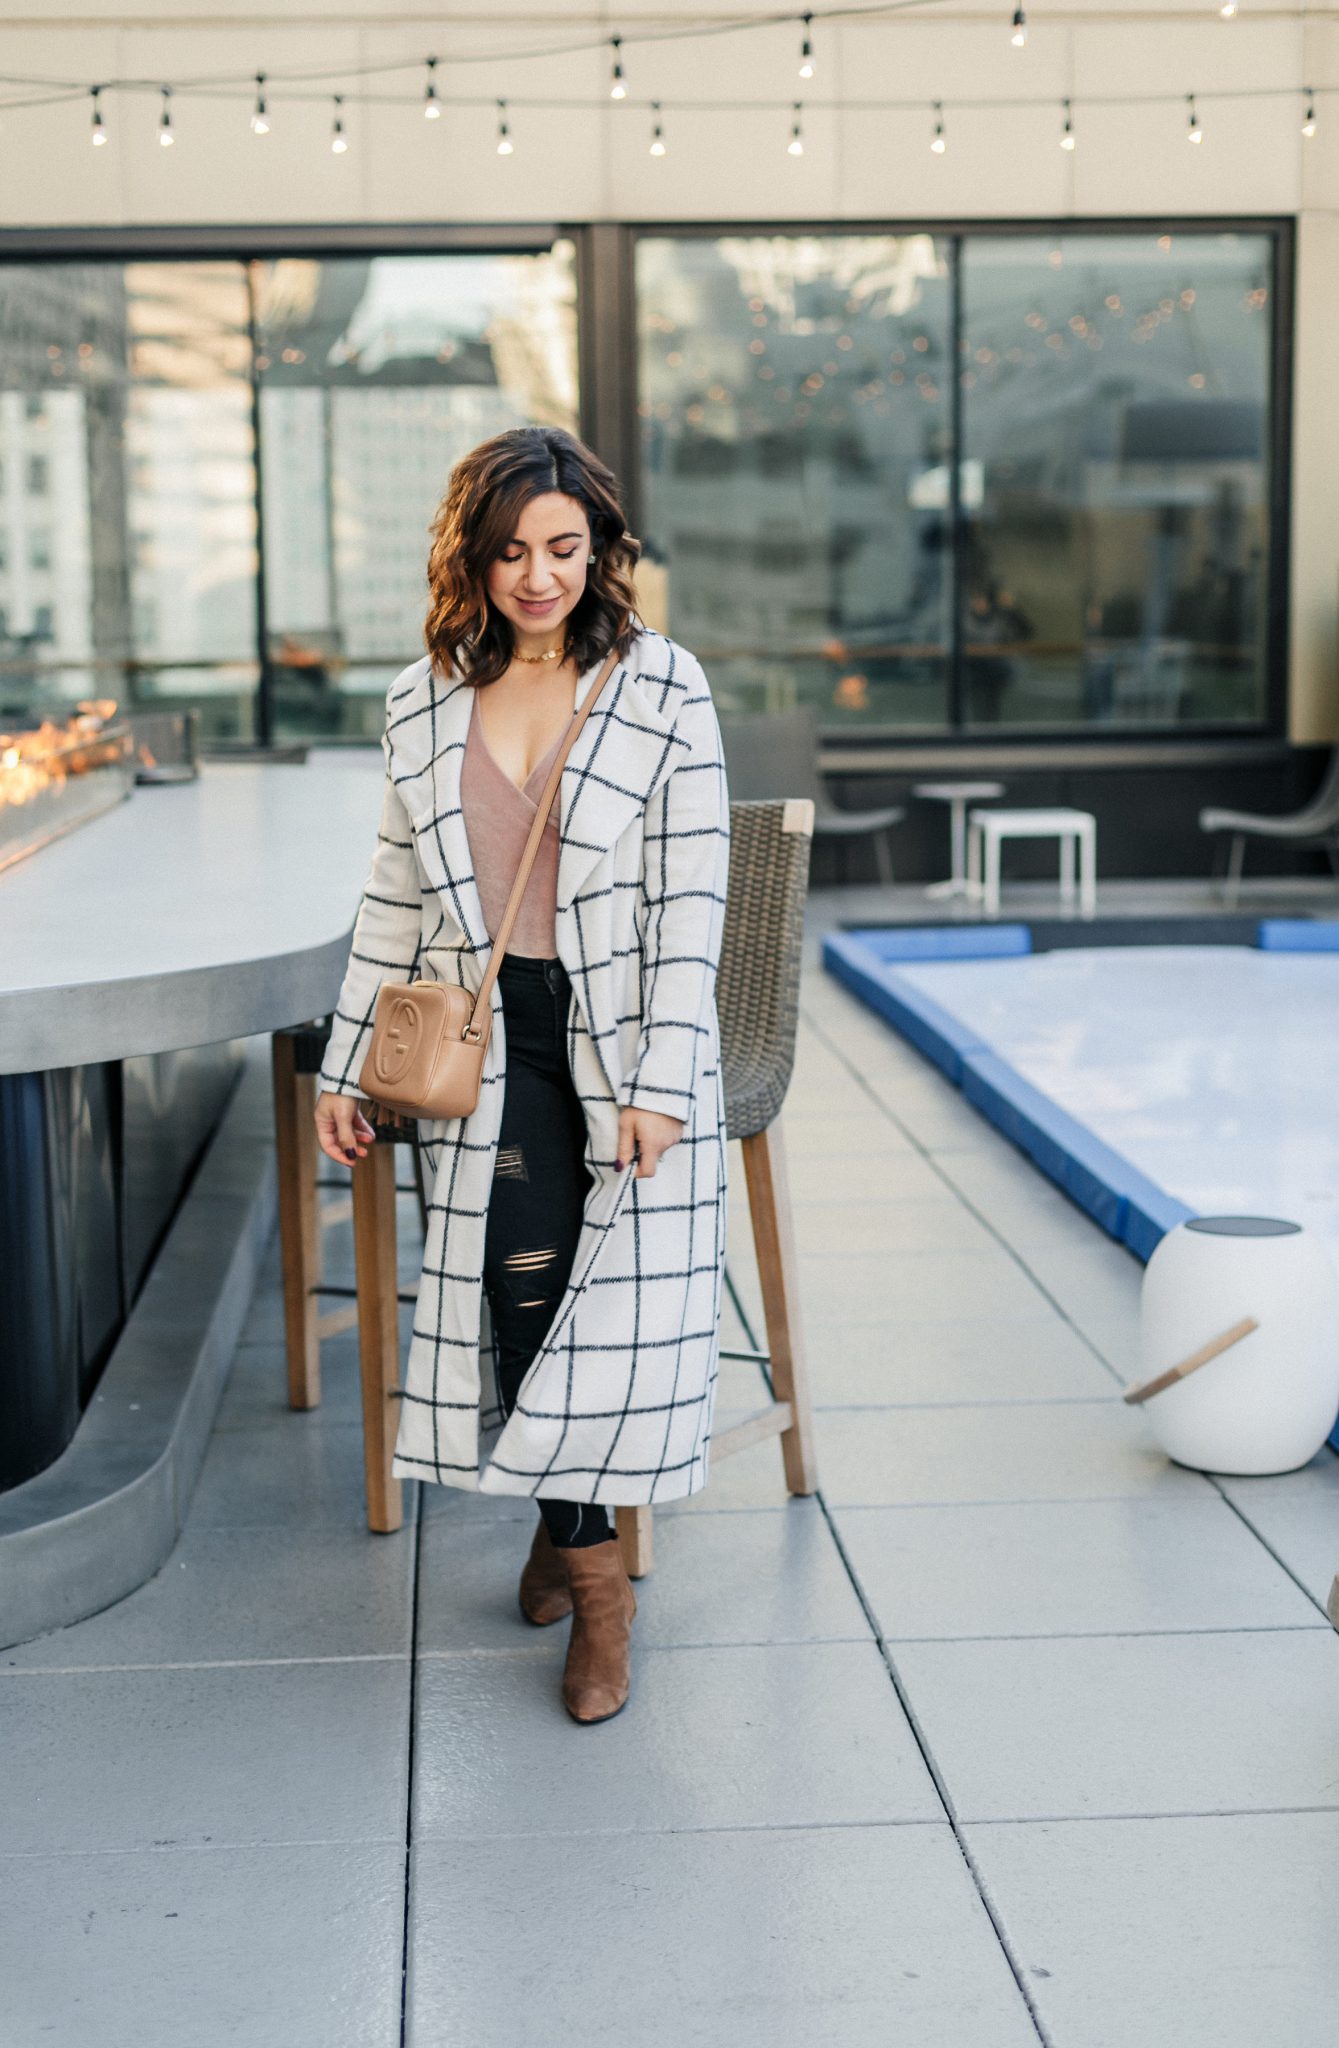 Lifestyle blogger Roxanne of Glass of Glam wearing a windowpane duster coat, velvet bodysuit, distressed denim, and a Gucci soho disco bag - SheIn windowpane duster coat by popular Washington fashion blogger Glass of Glam